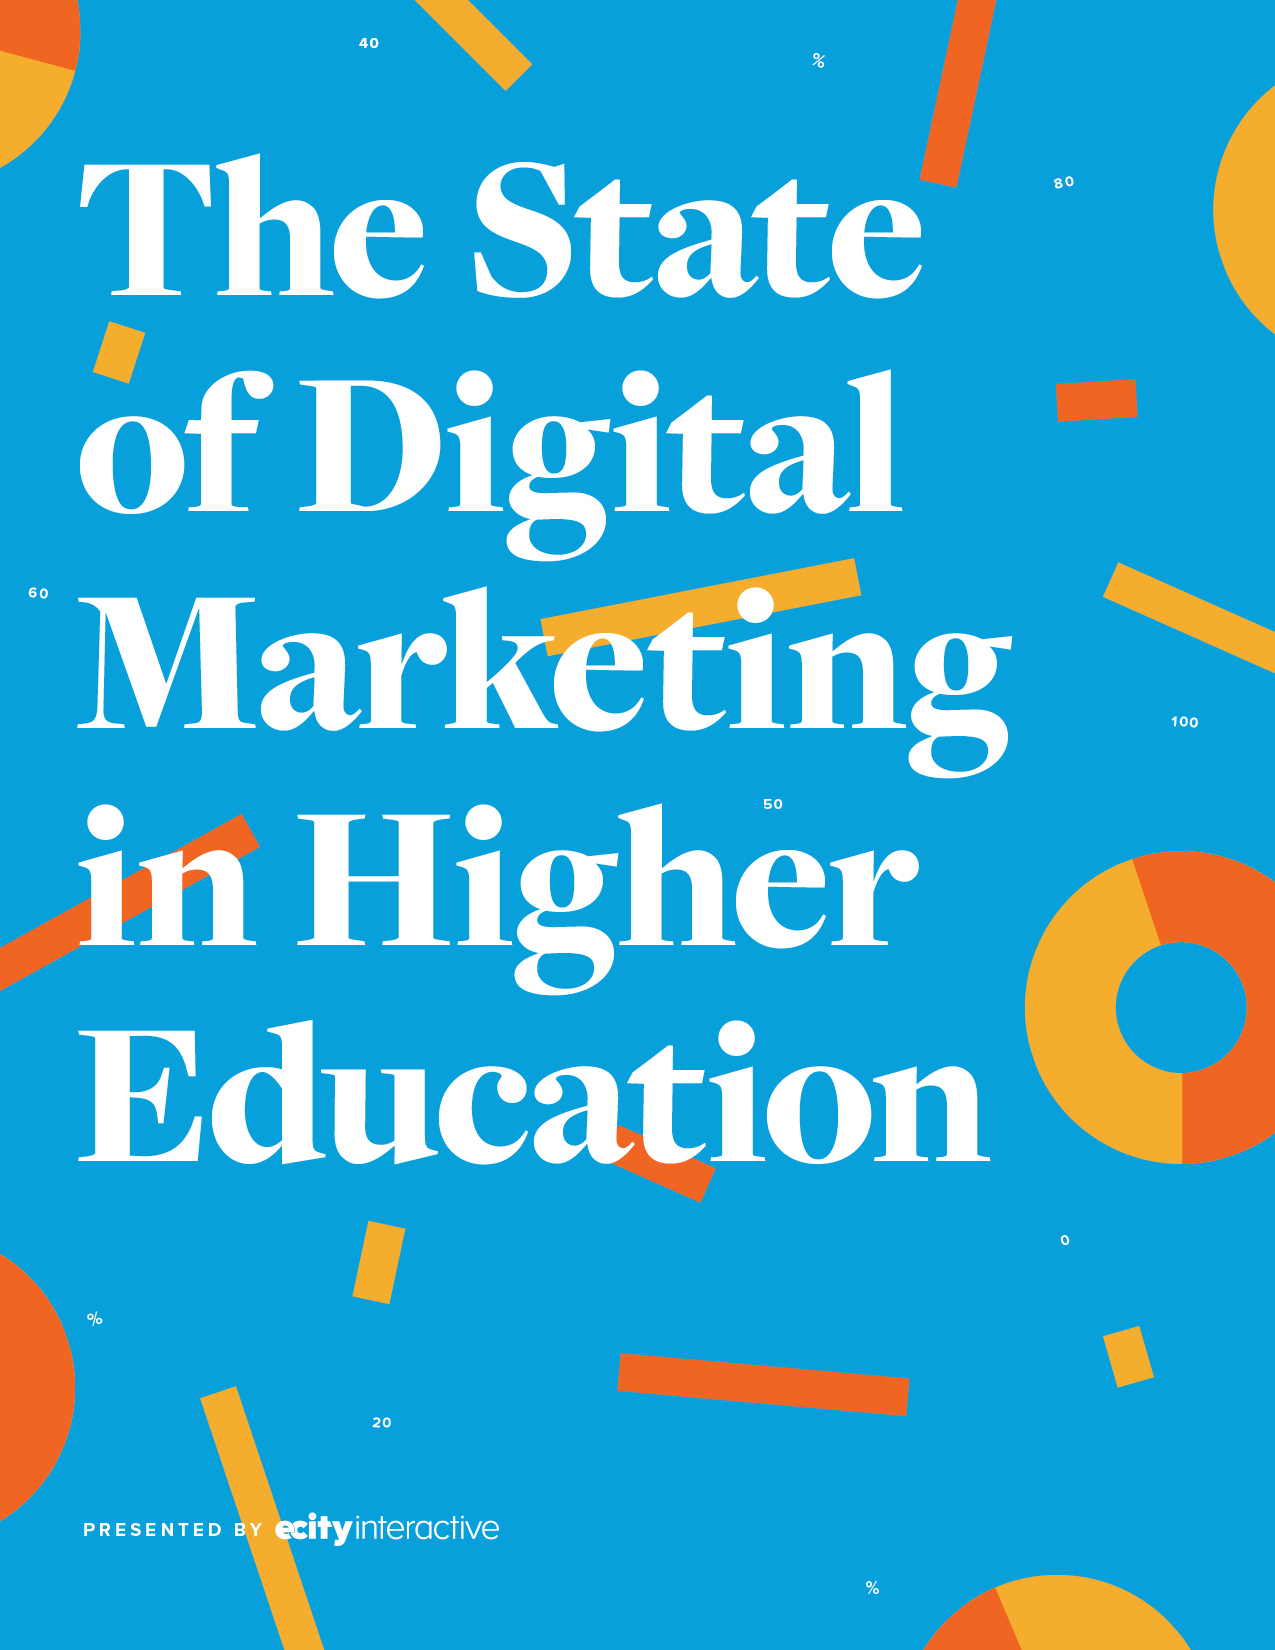 A photo of the The State of Digital Marketing in Higher Education report